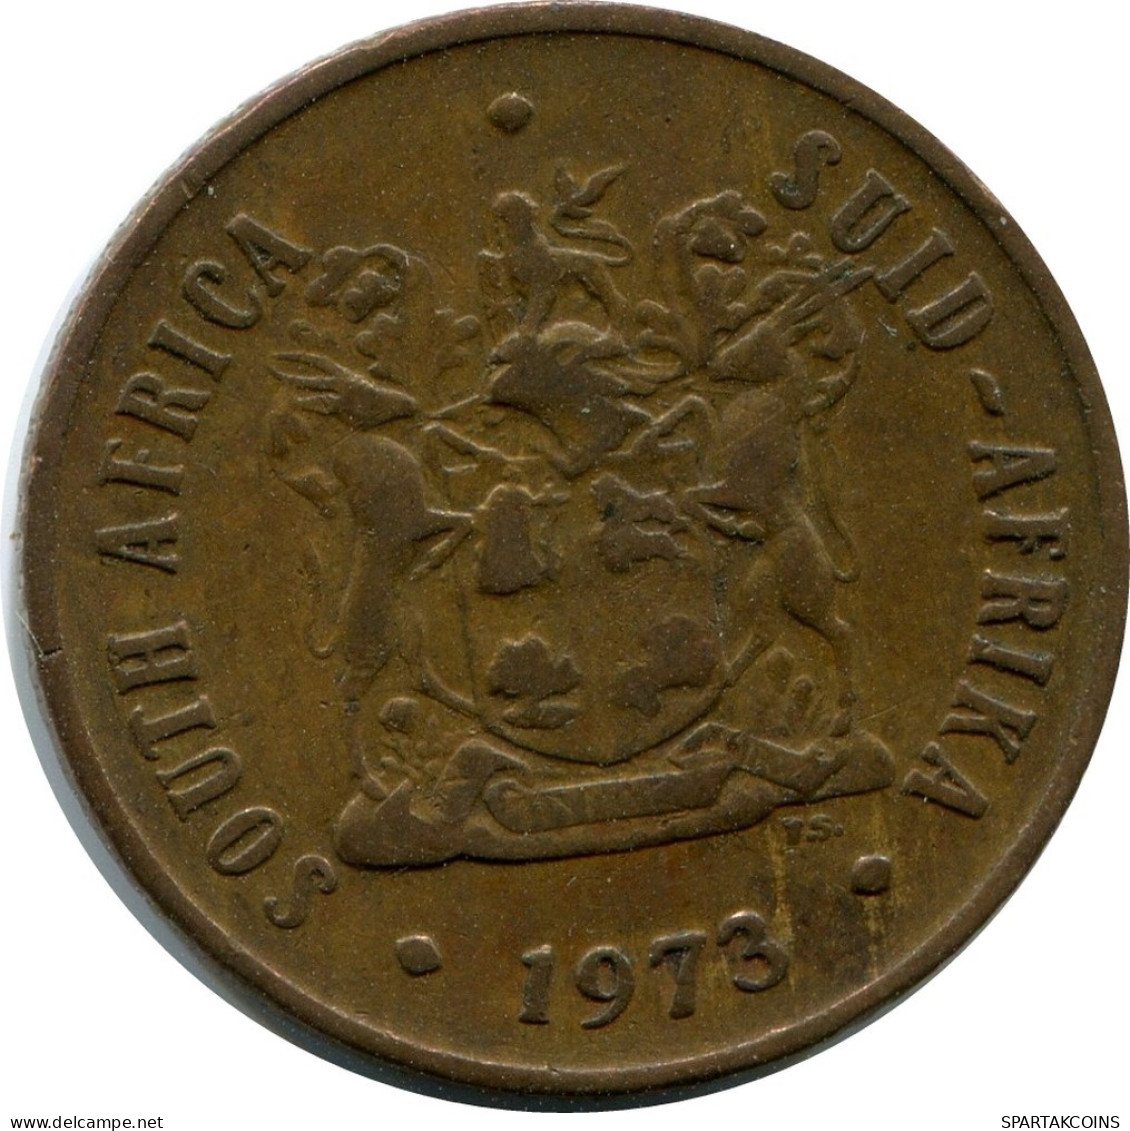 2 CENTS 1973 SOUTH AFRICA Coin #AX172.U.A - Sud Africa